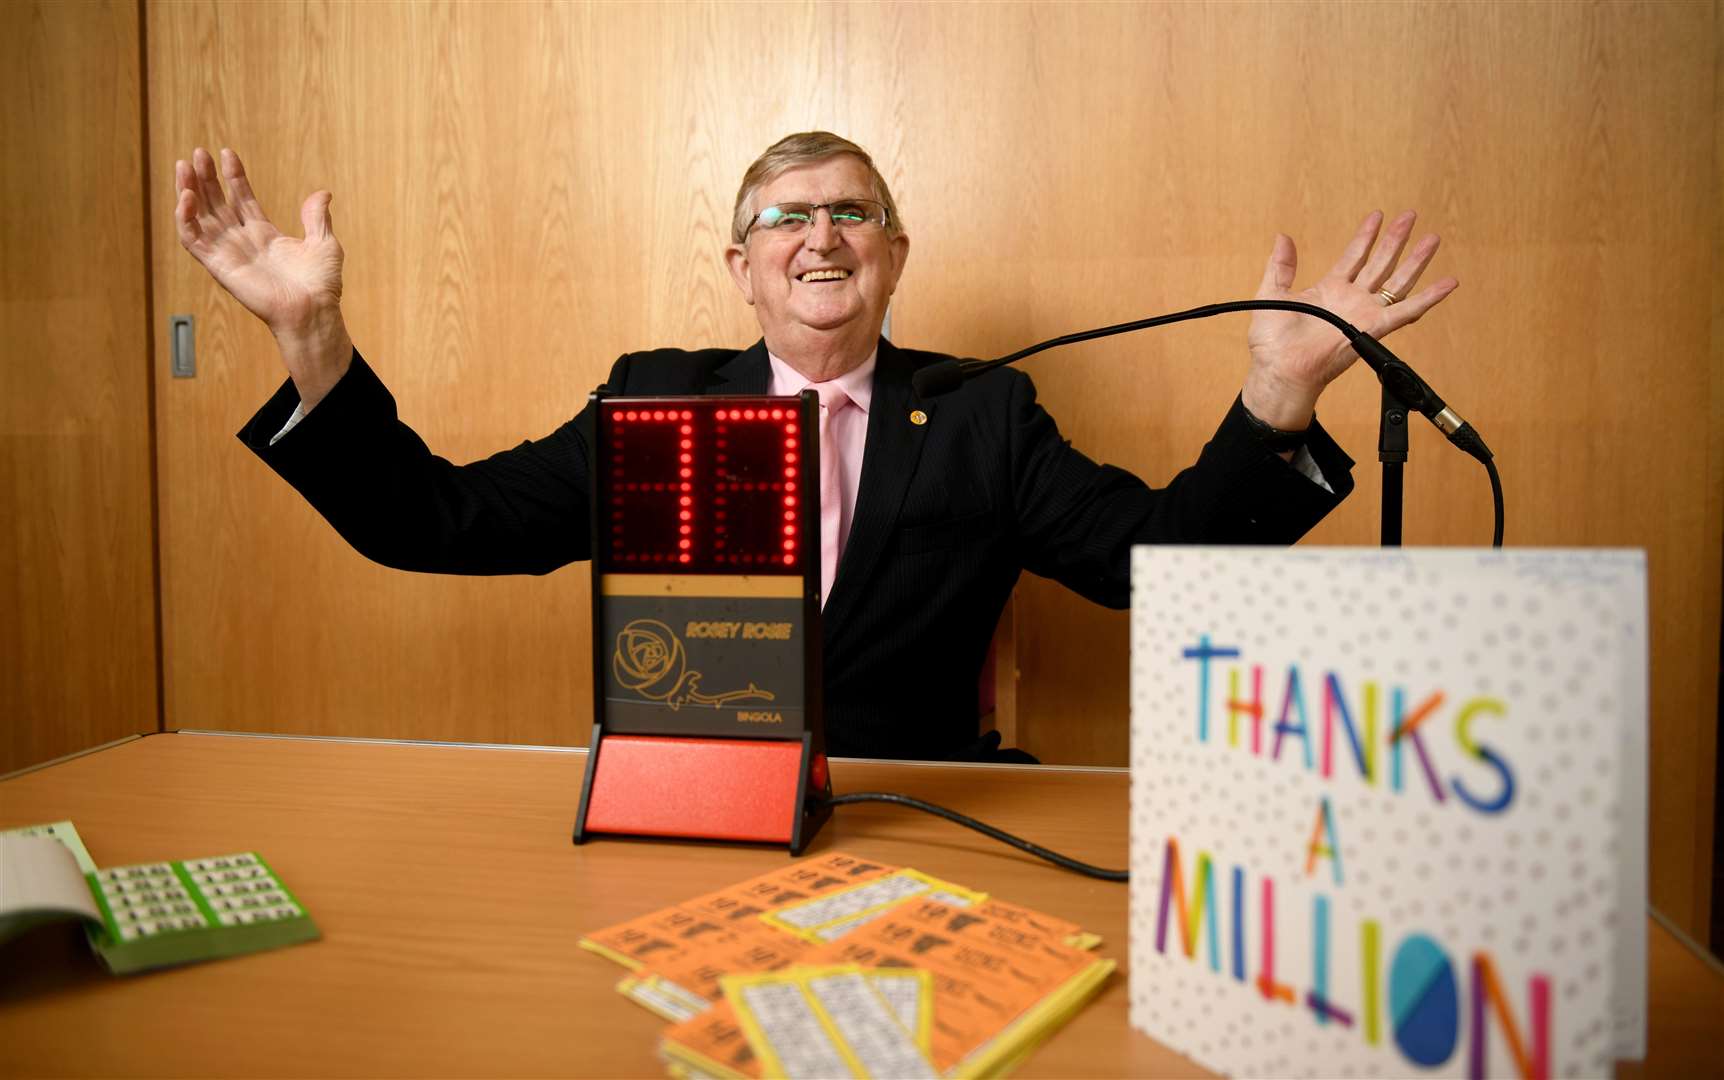 Don Williams with his age and Thank You card displayed. Picture: James Mackenzie